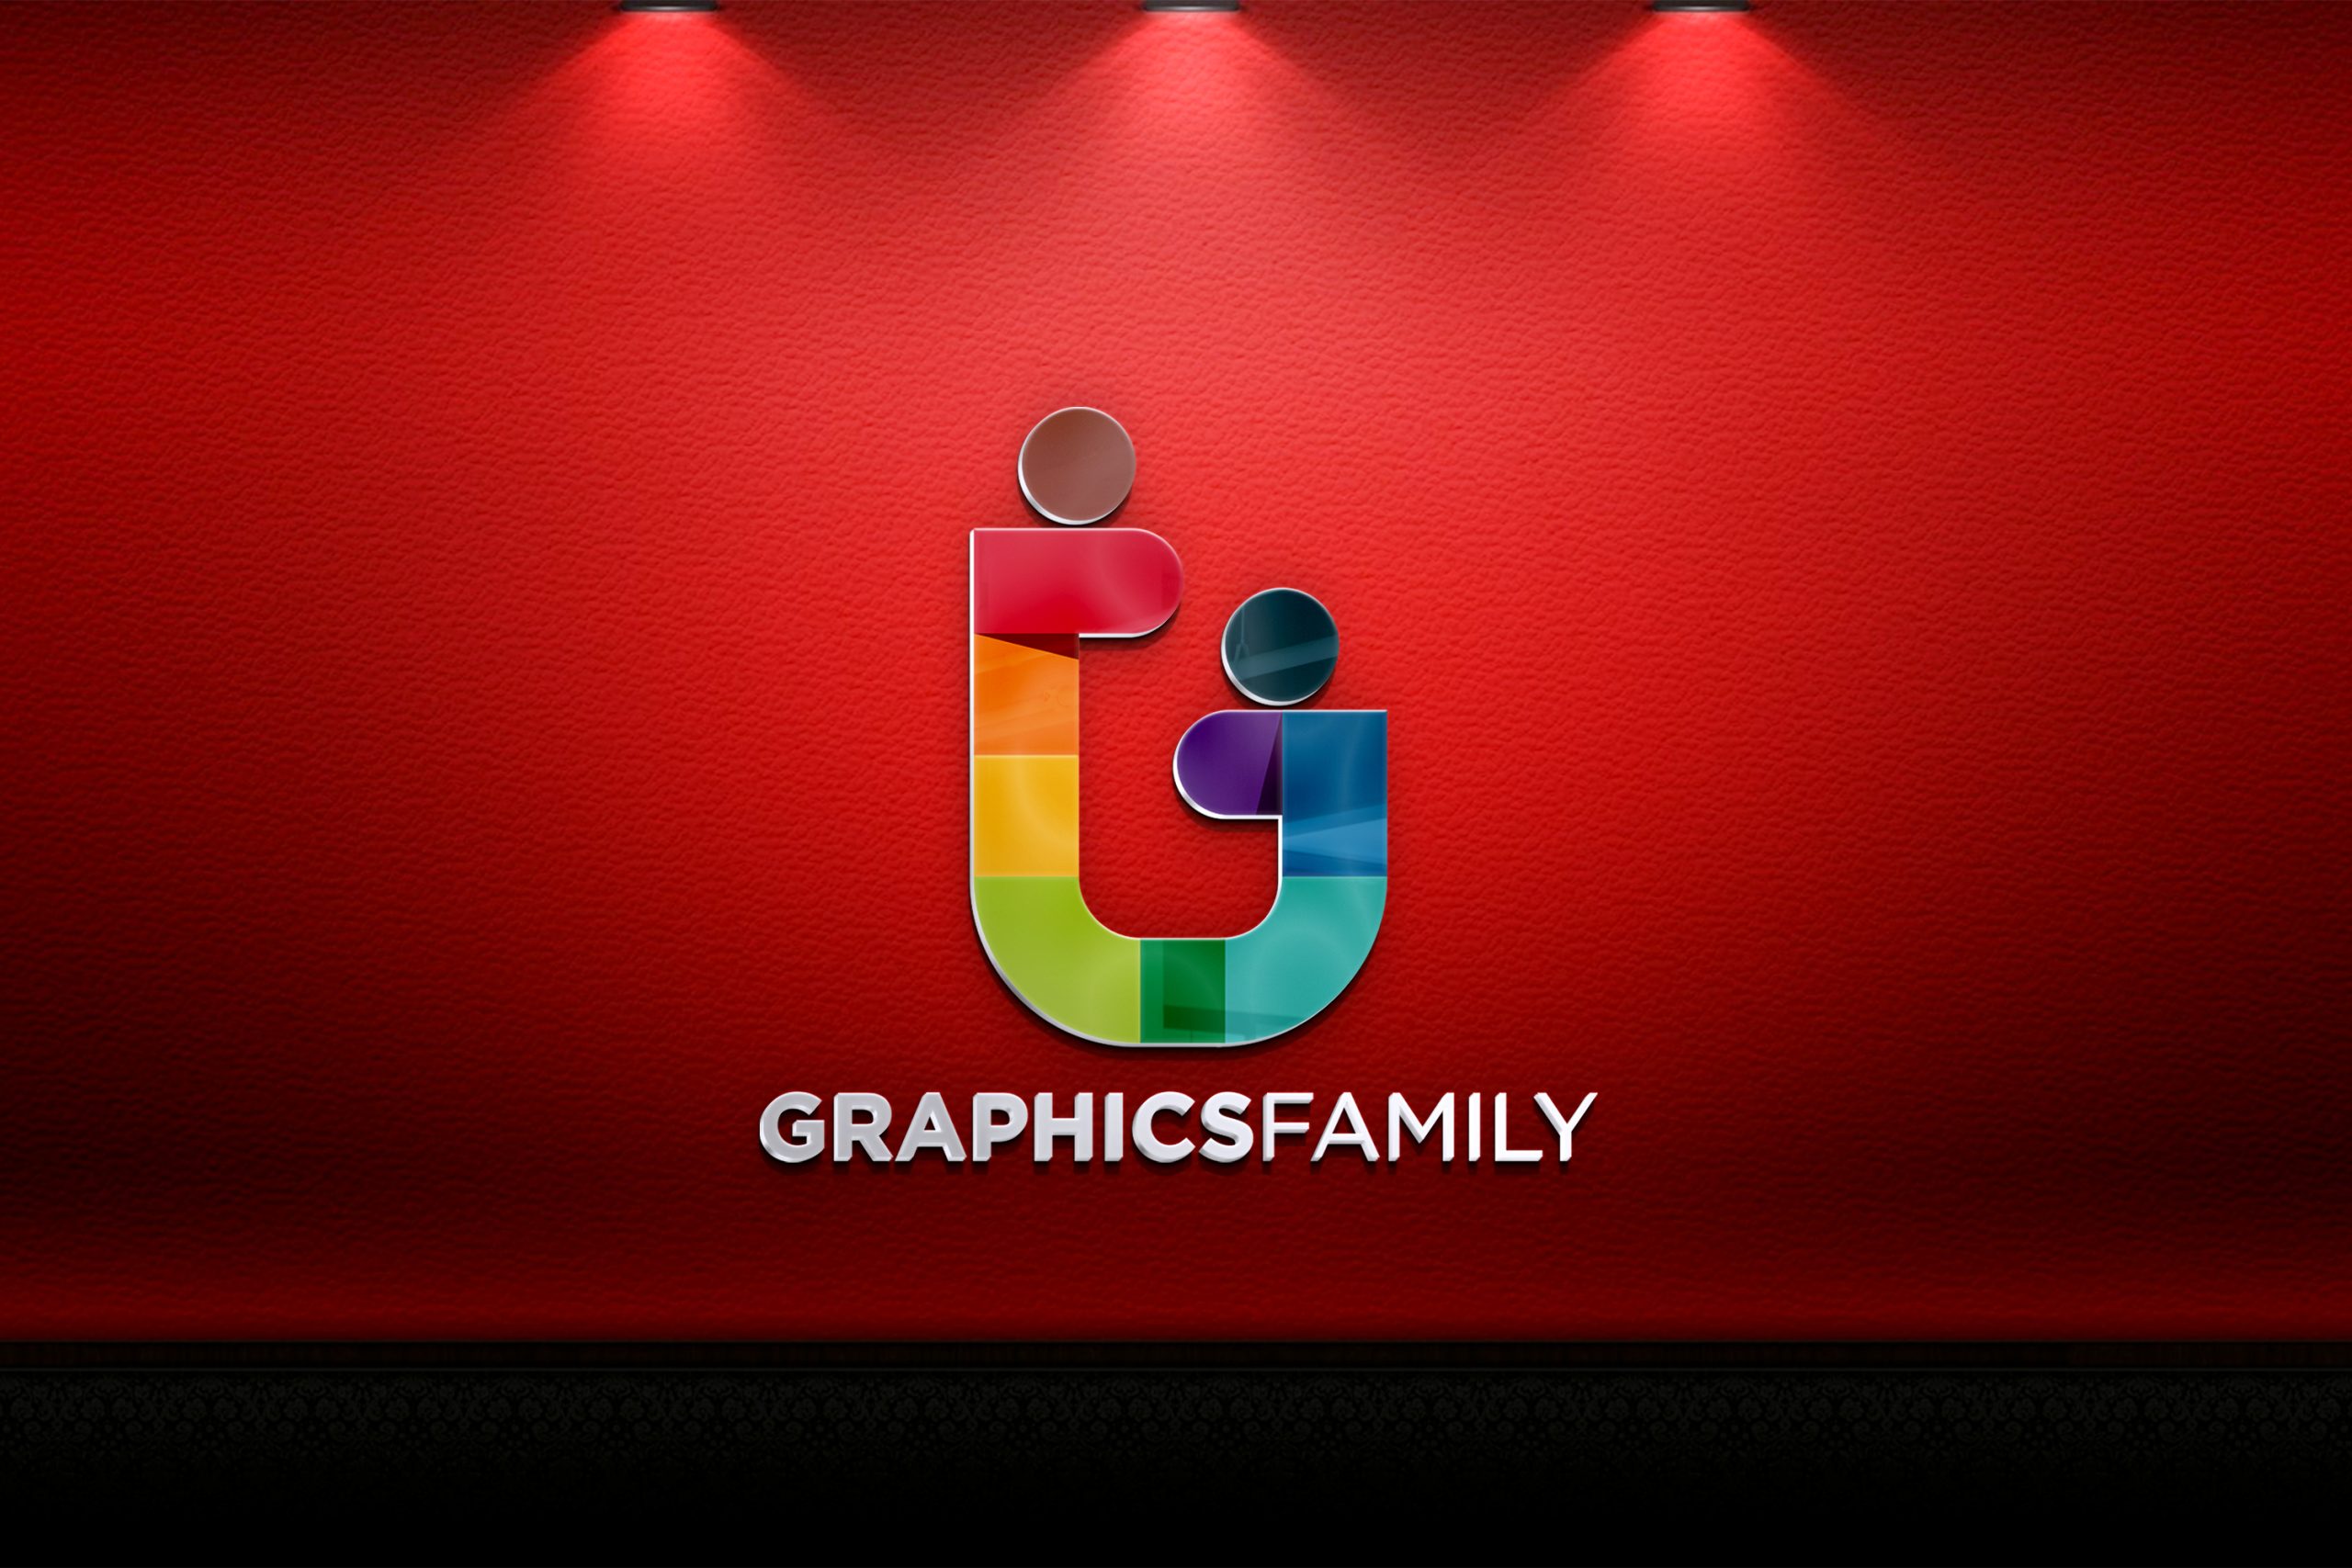 3D Logo Mockup on Red Wall